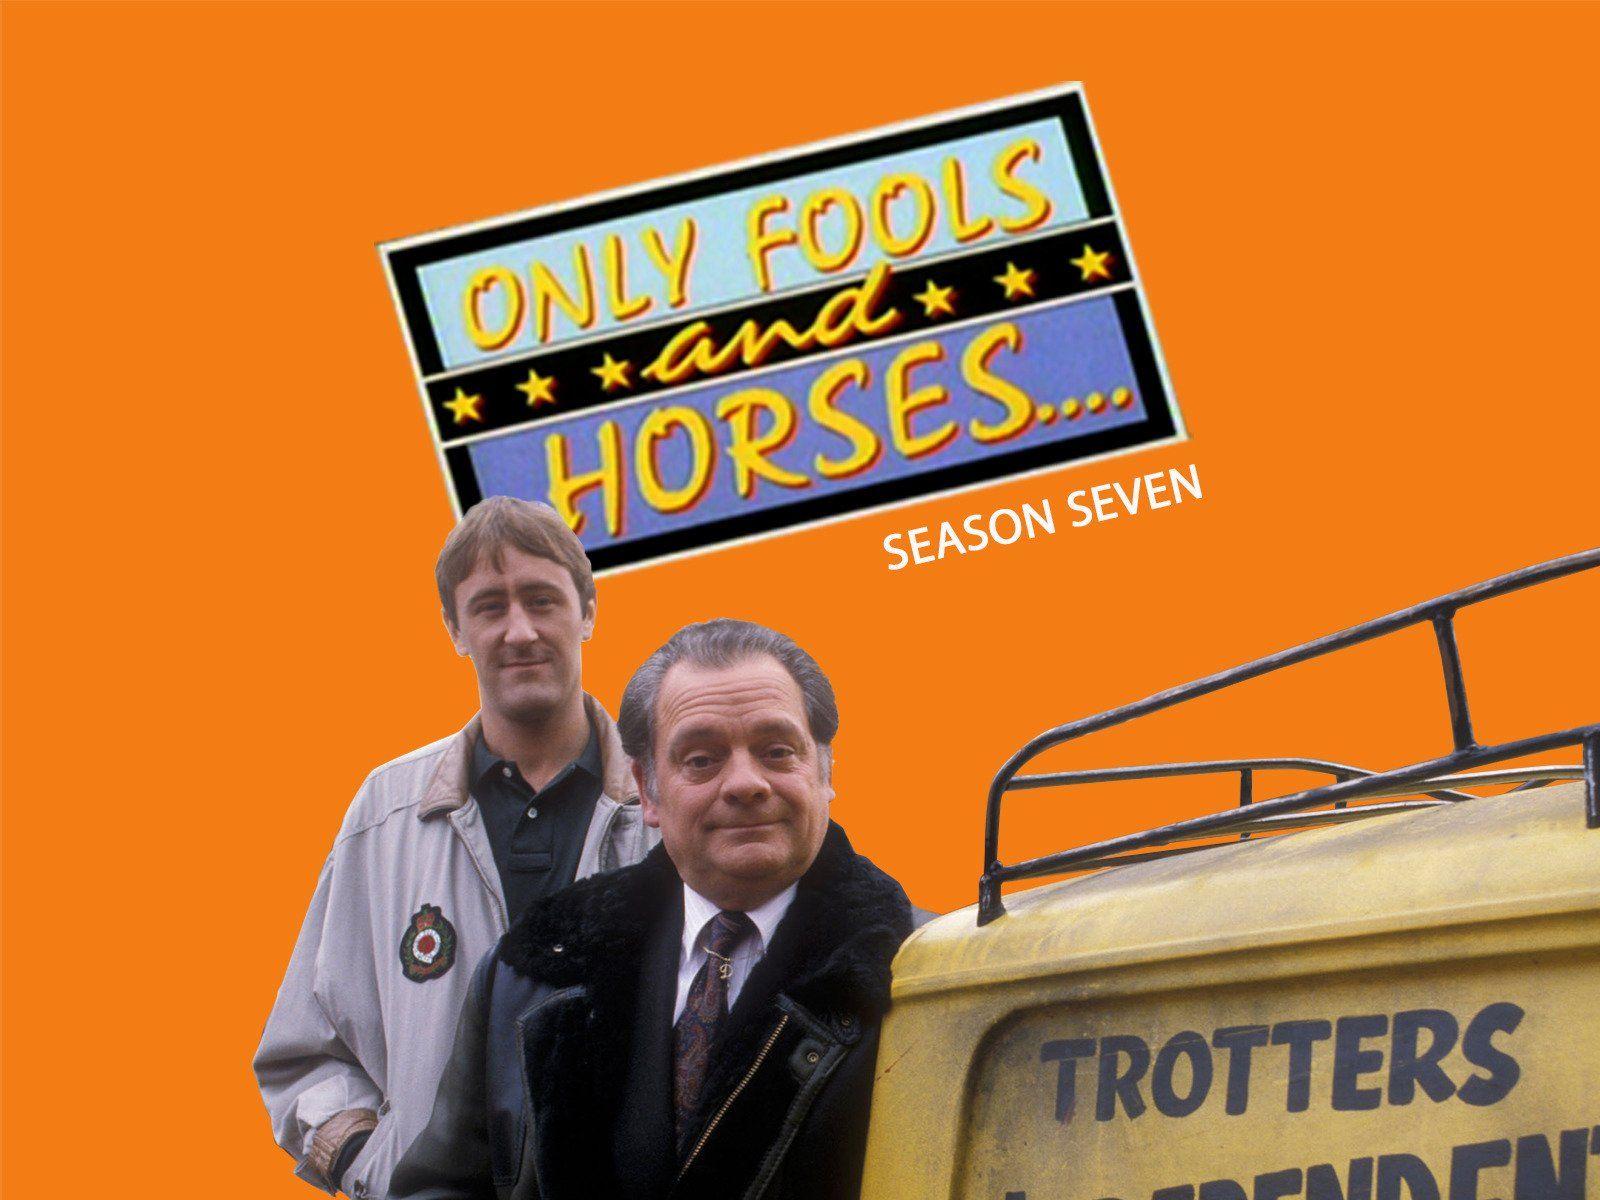 Only Fools and Horses, Season 7